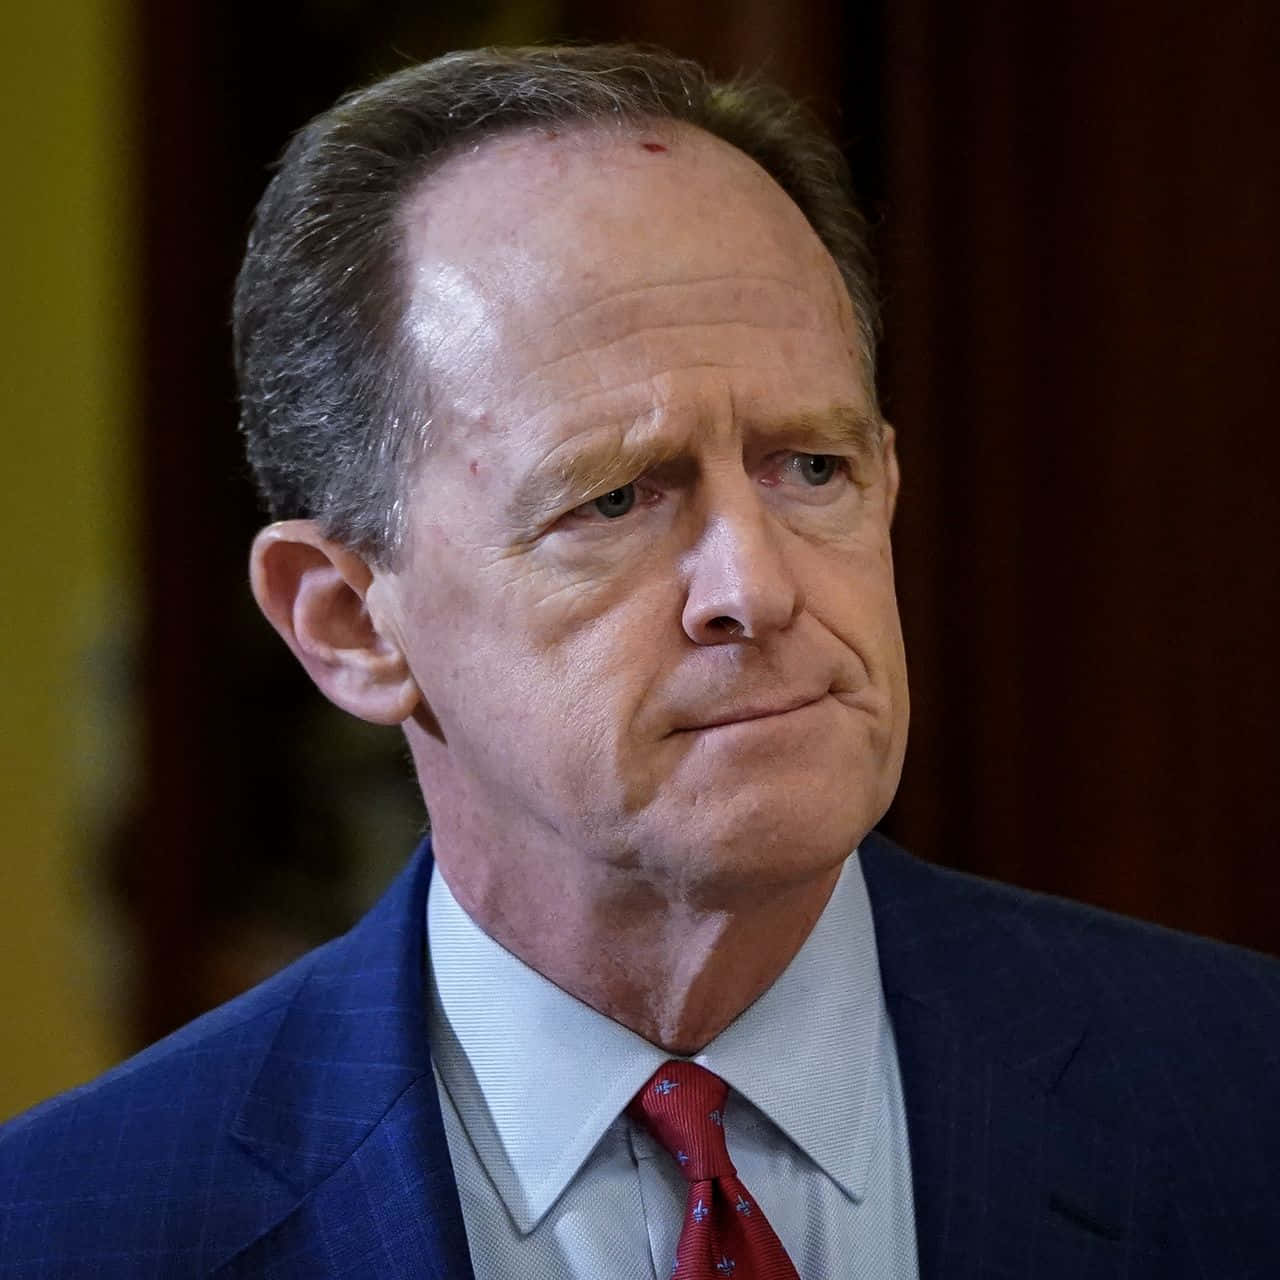 Pat Toomey With Frown Background